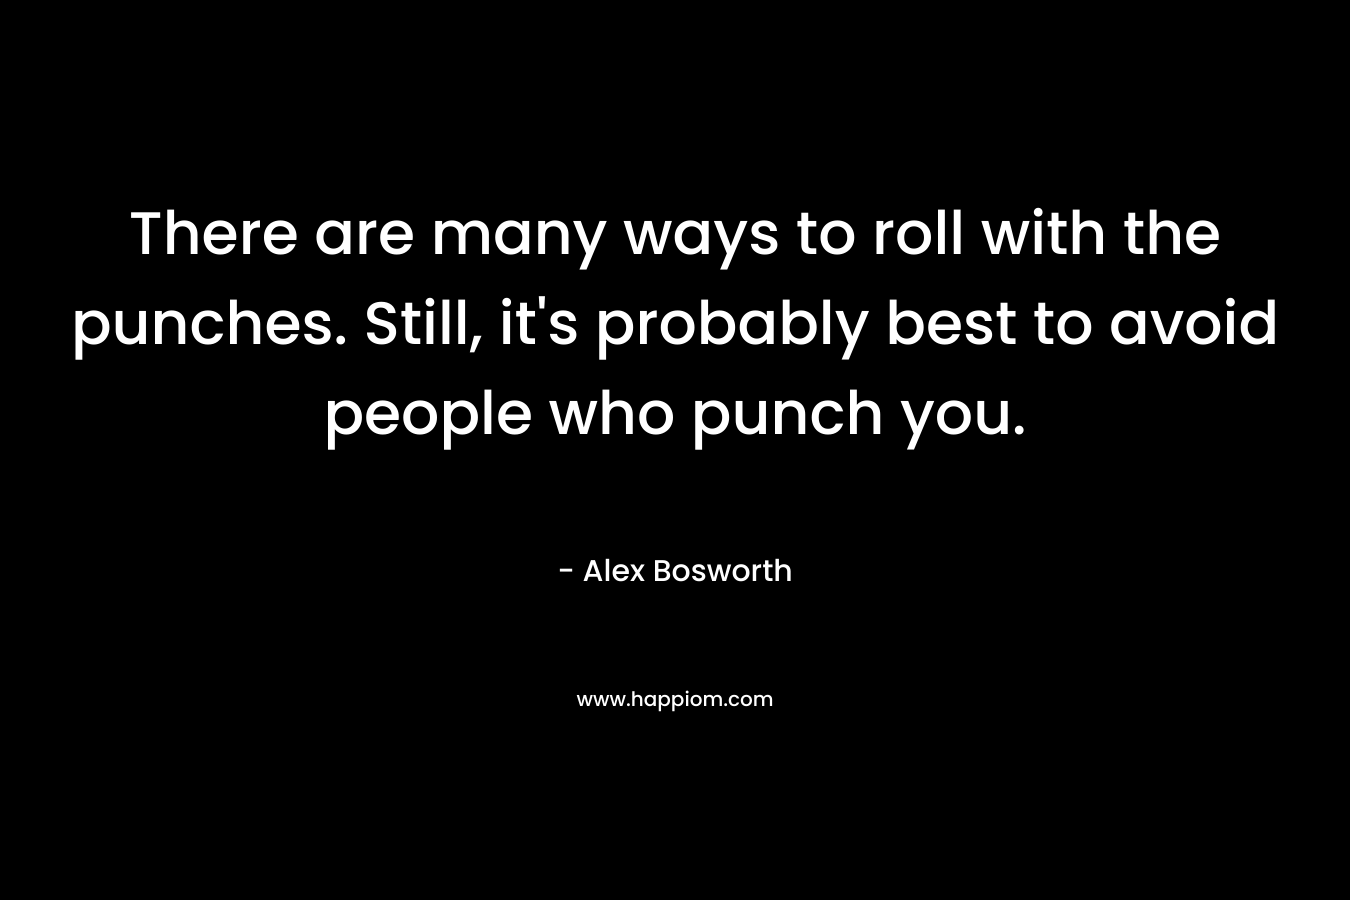 There are many ways to roll with the punches. Still, it’s probably best to avoid people who punch you. – Alex Bosworth